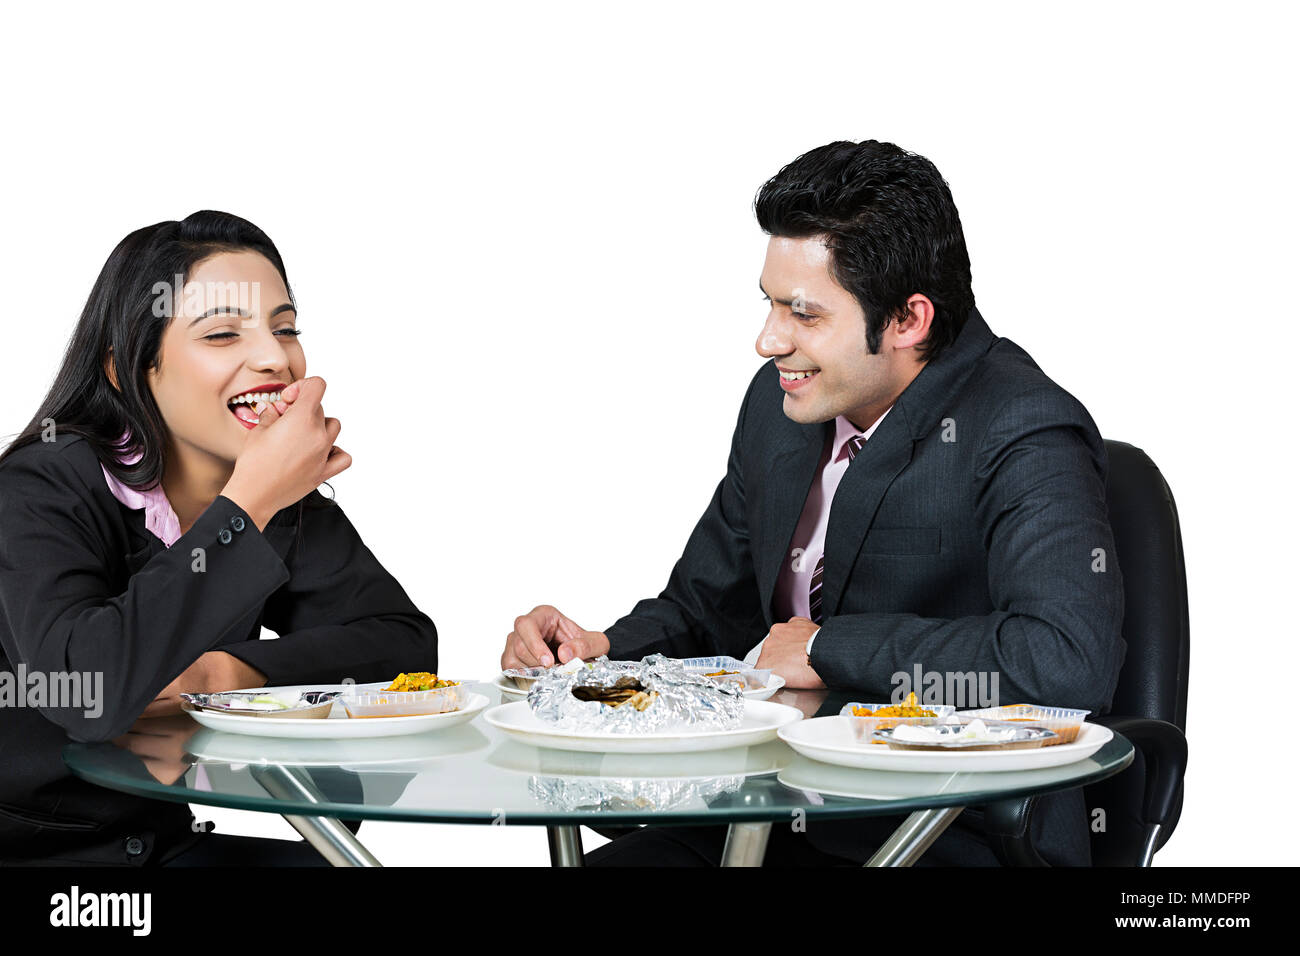 Two Business People Colleague Friend Having Lunch Together Lunch-Break Stock Photo